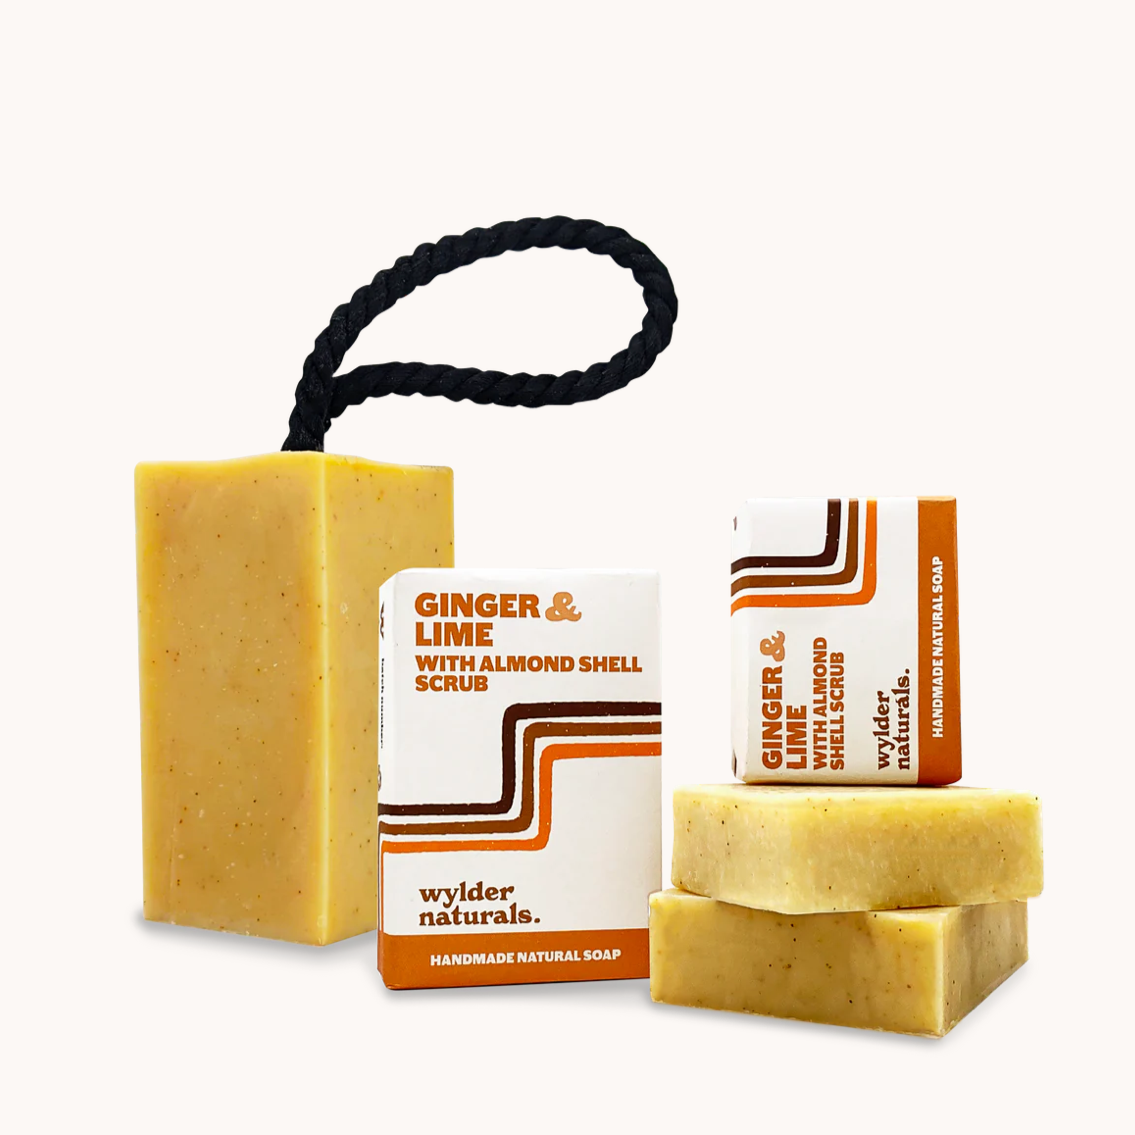 Wylder Naturals Ginger & Lime with Almond Shell Soap